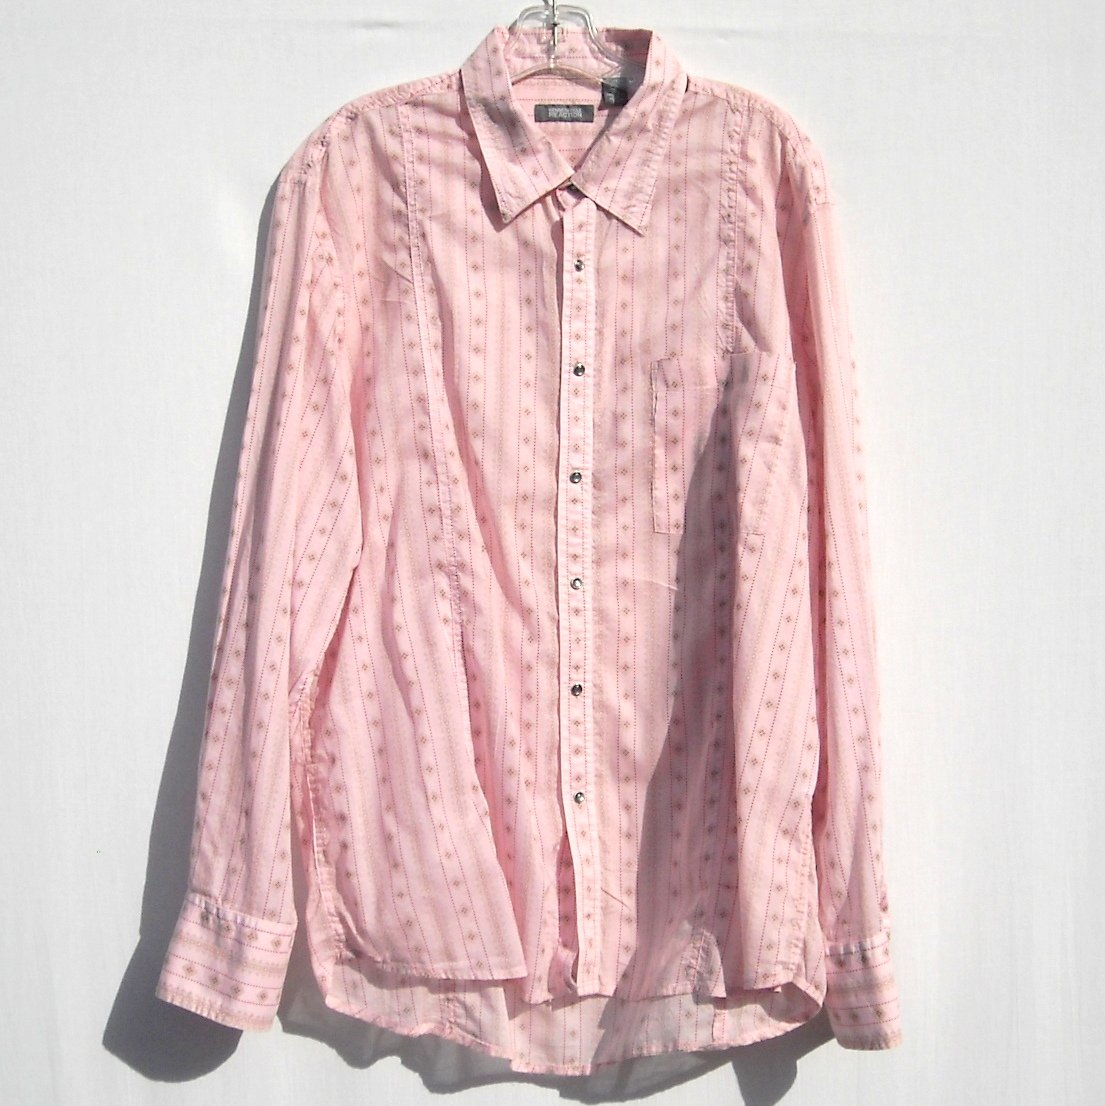 Kenneth Cole Reaction 100% Cotton Pink Shirt Size XXL